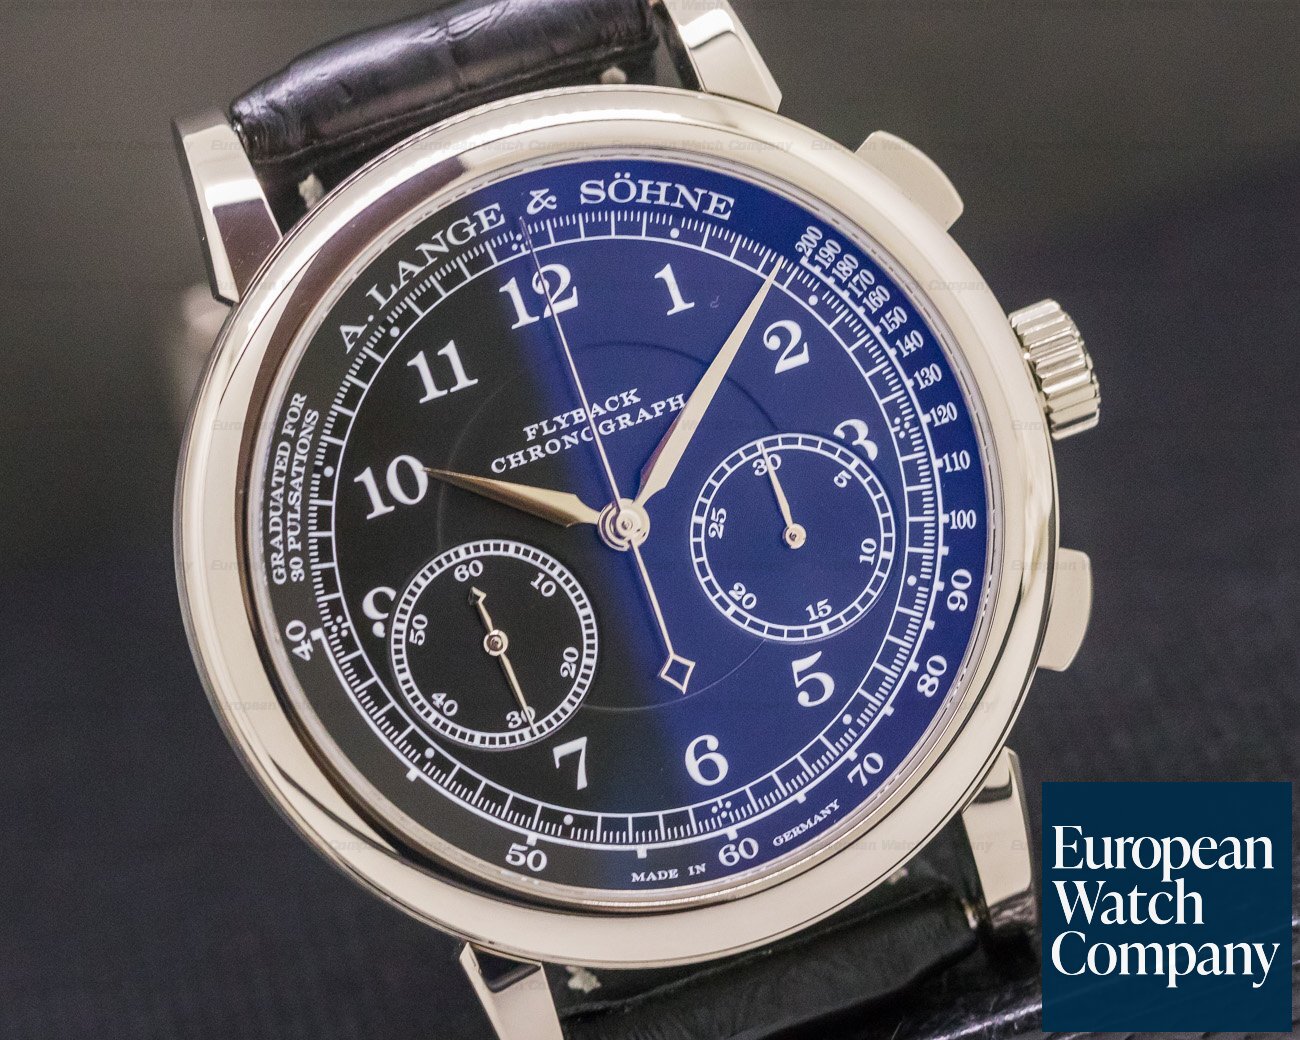 A. Lange and Sohne 1815 Chronograph 18K White Gold DEPLOYANT BUCKLE 2018 Ref. 414.028